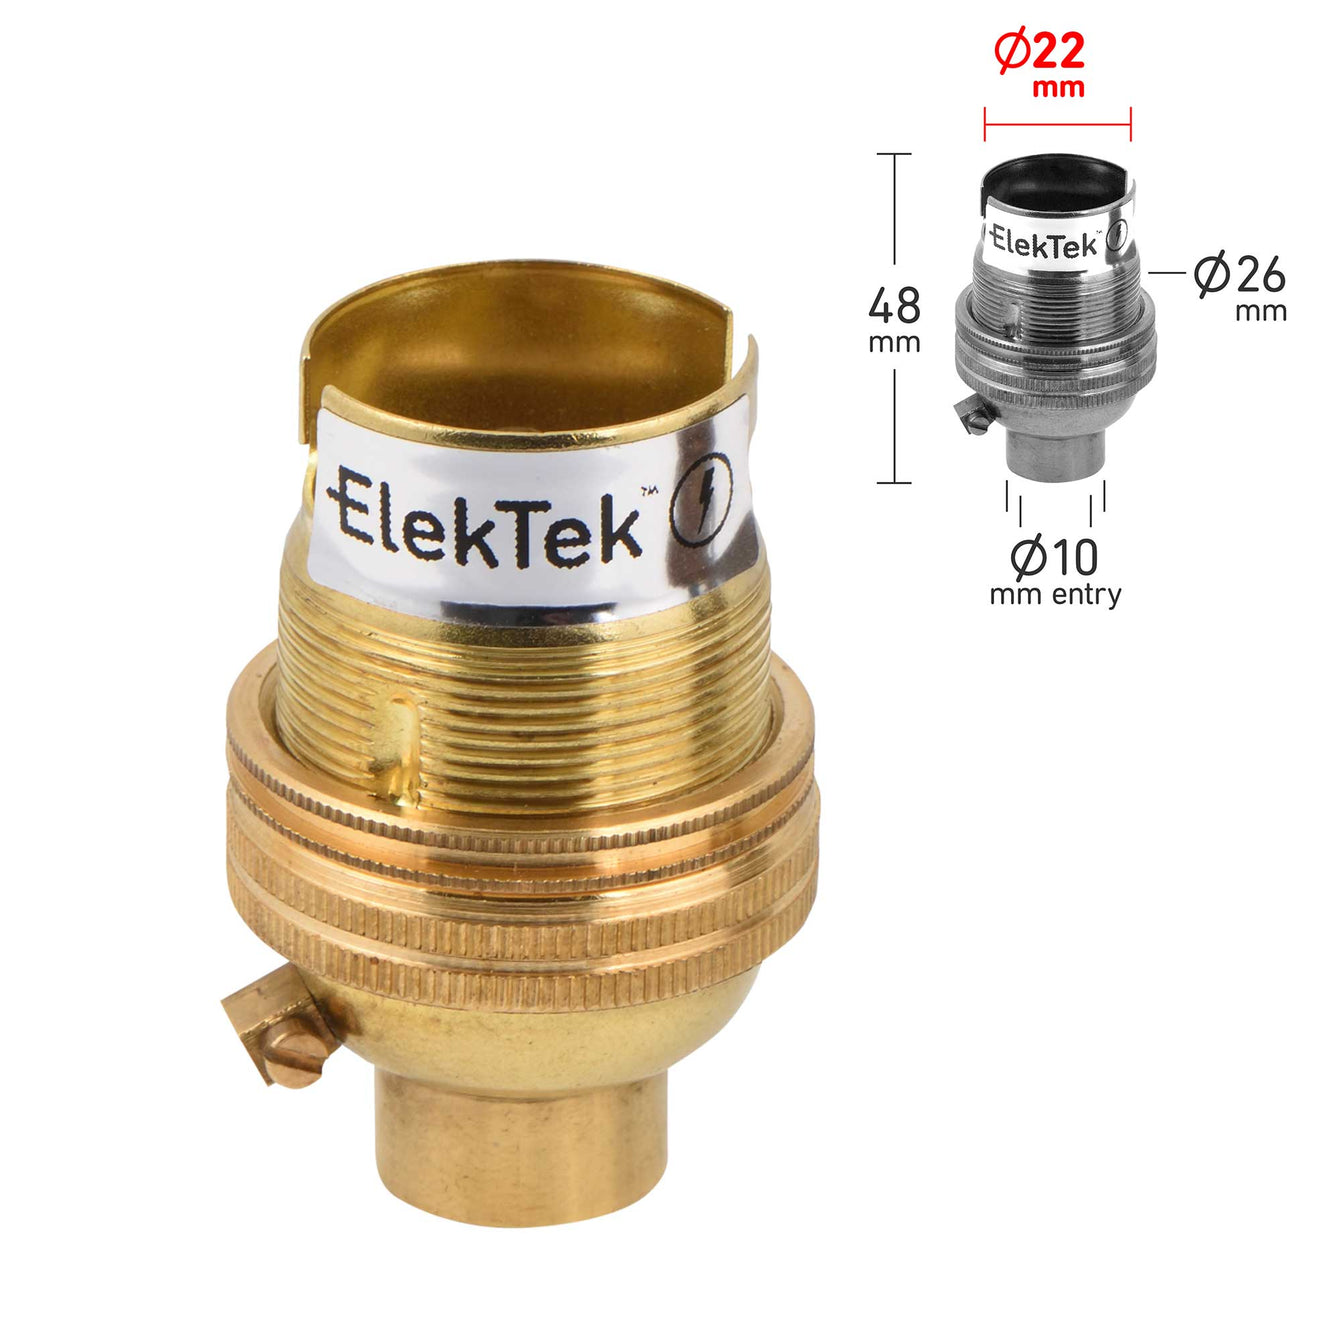 ElekTek Lamp Holder Bayonet Cap B22 Unswitched 10mm or Half Inch Entry With Shade Ring Solid Brass - Buy It Better Antique Brass / 10mm